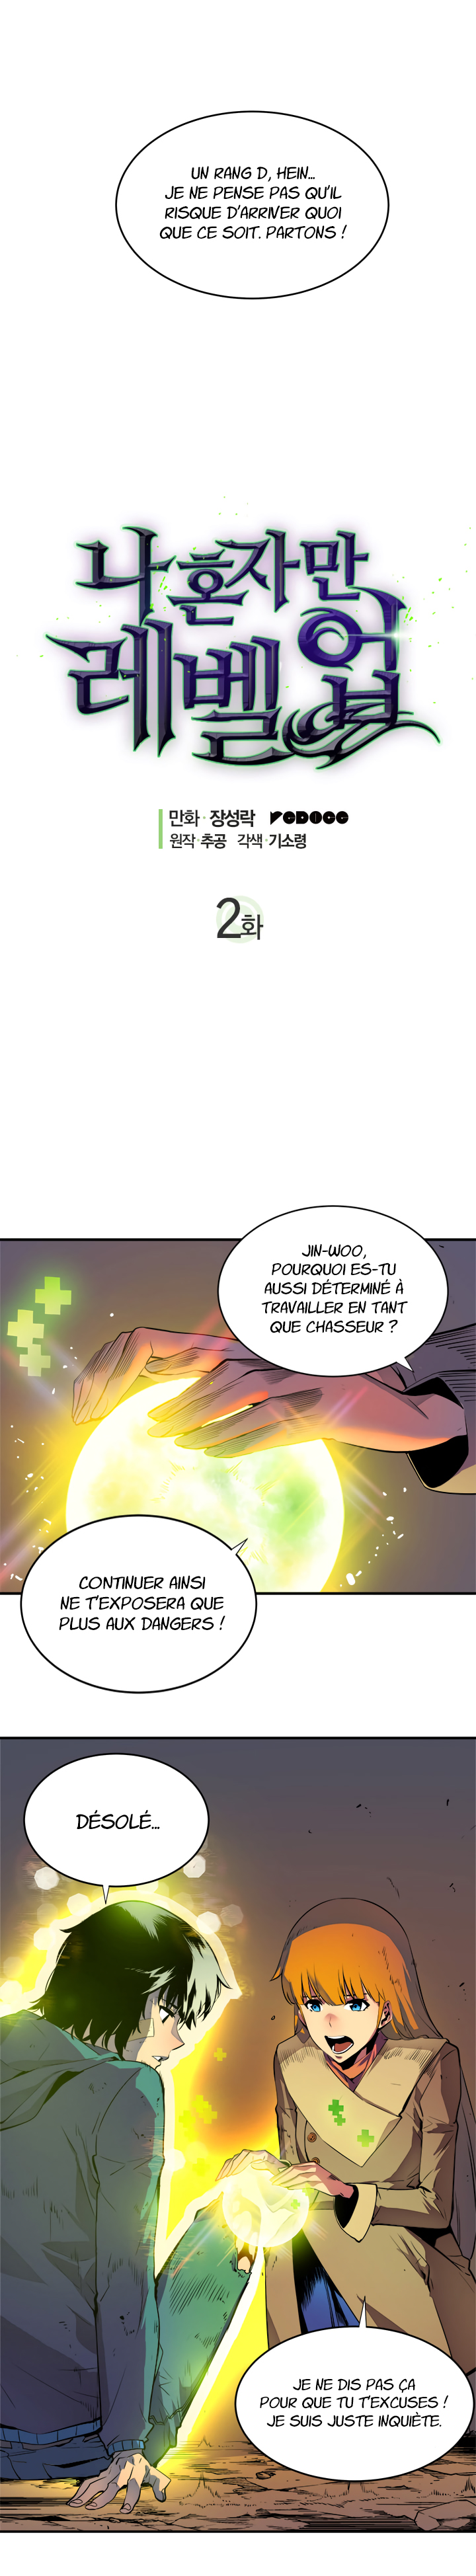 Solo Leveling: Chapter chapitre-2 - Page 2